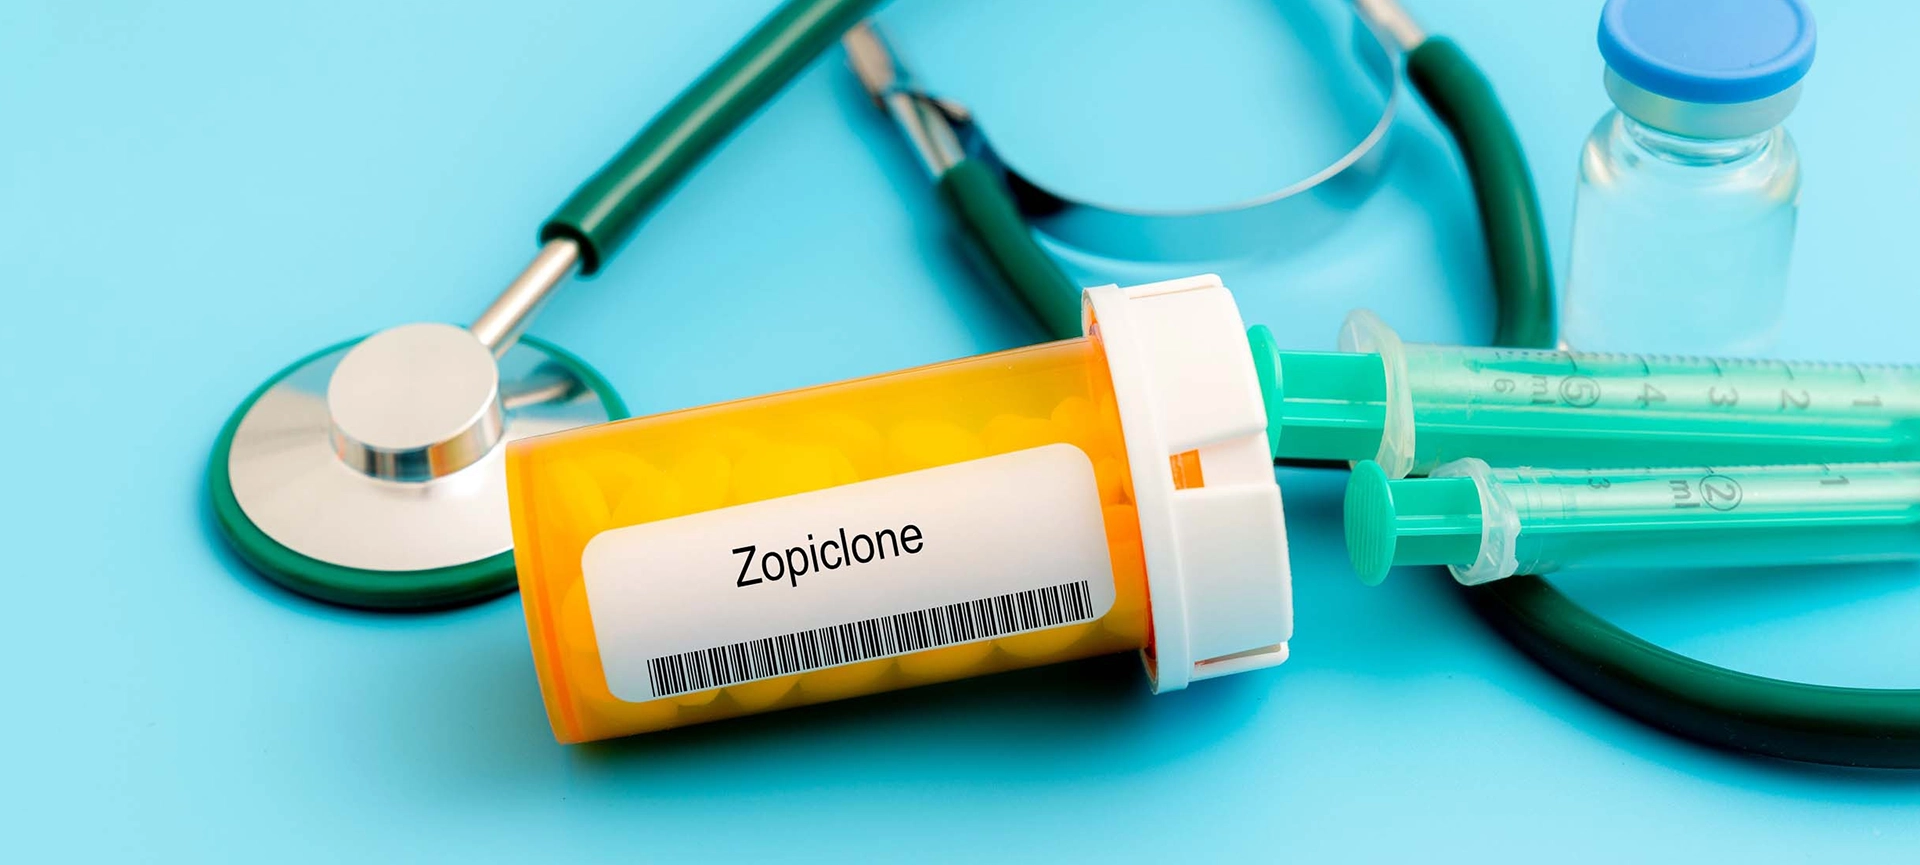 How Effective Zopiclone Is As A Sleeping Disorder Treatment?